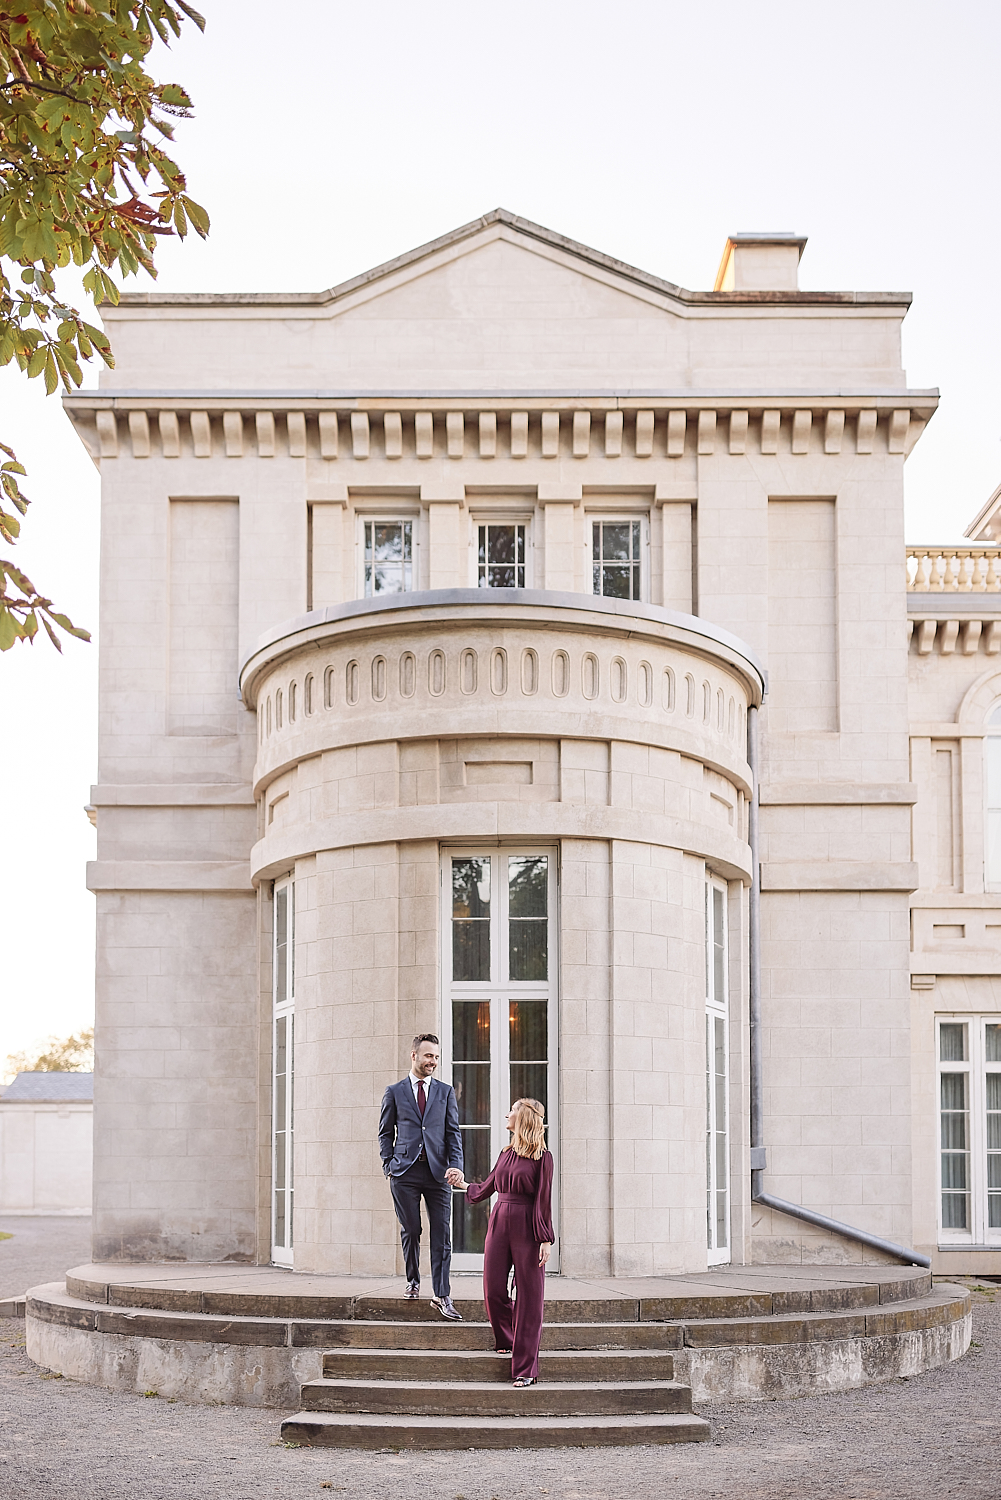 Dundurn Castle Engagement Session – Greco Photo Company